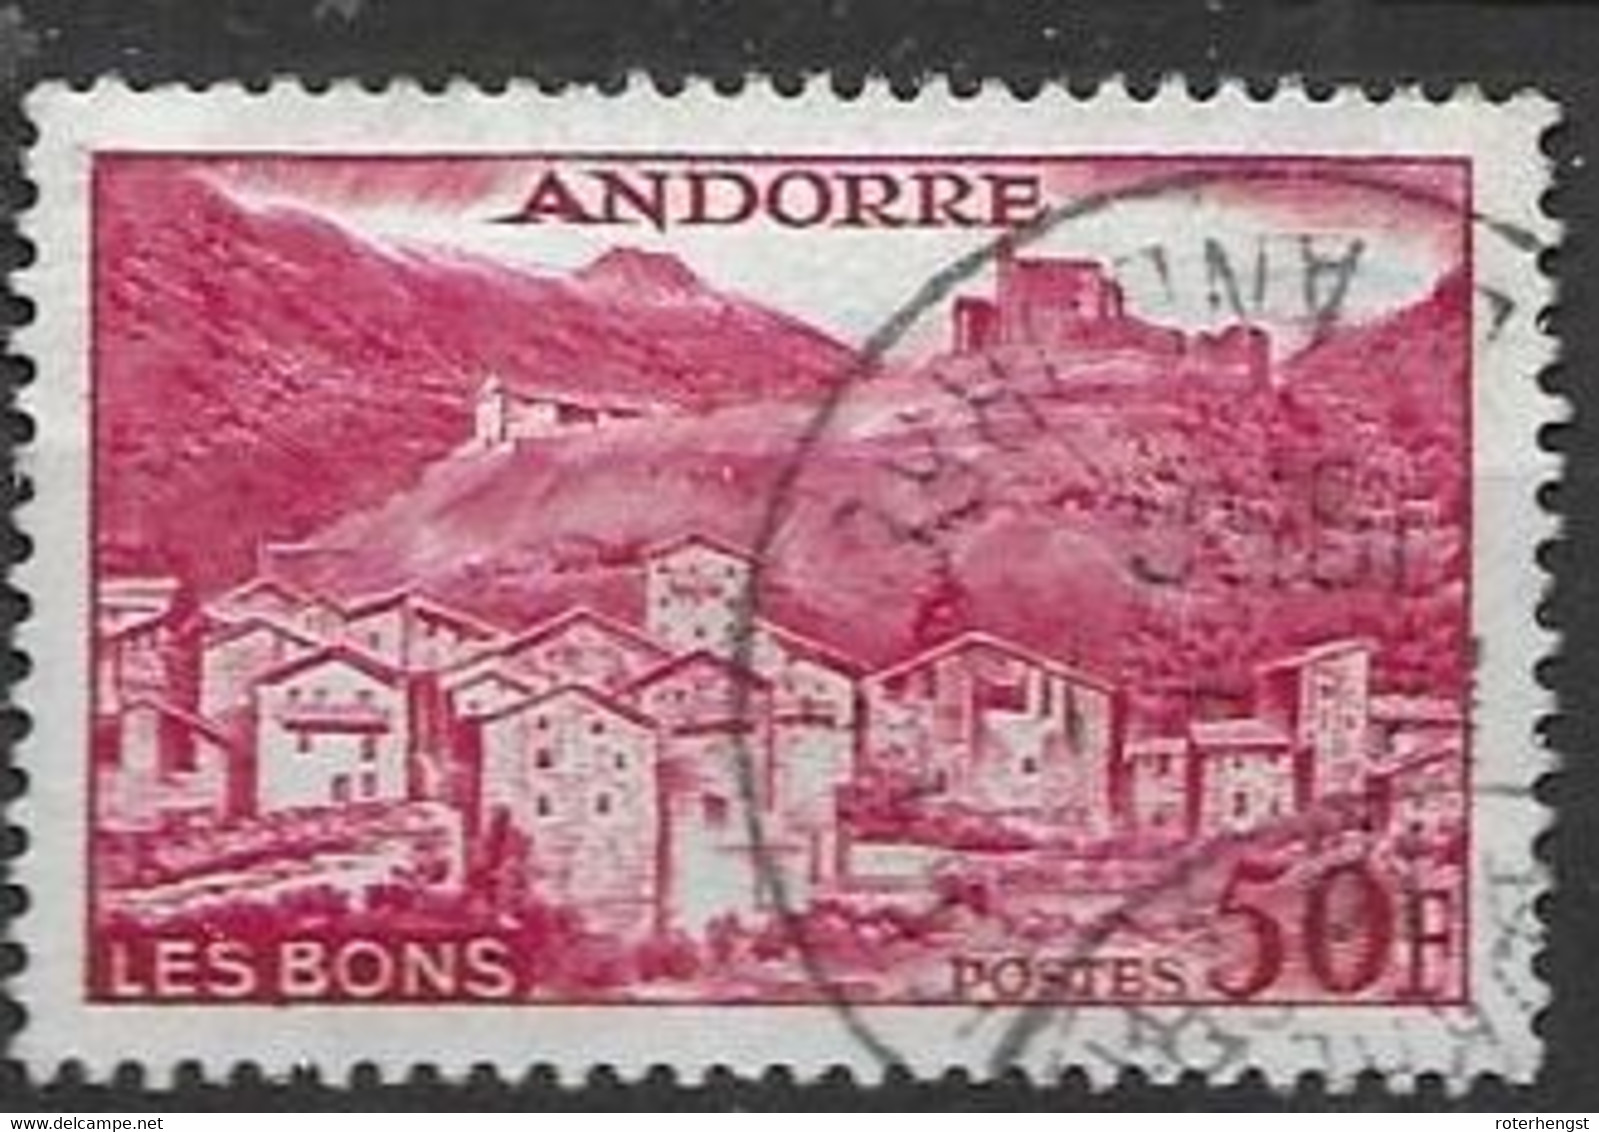 Andorre VFU 1955 3 Euros - Used Stamps